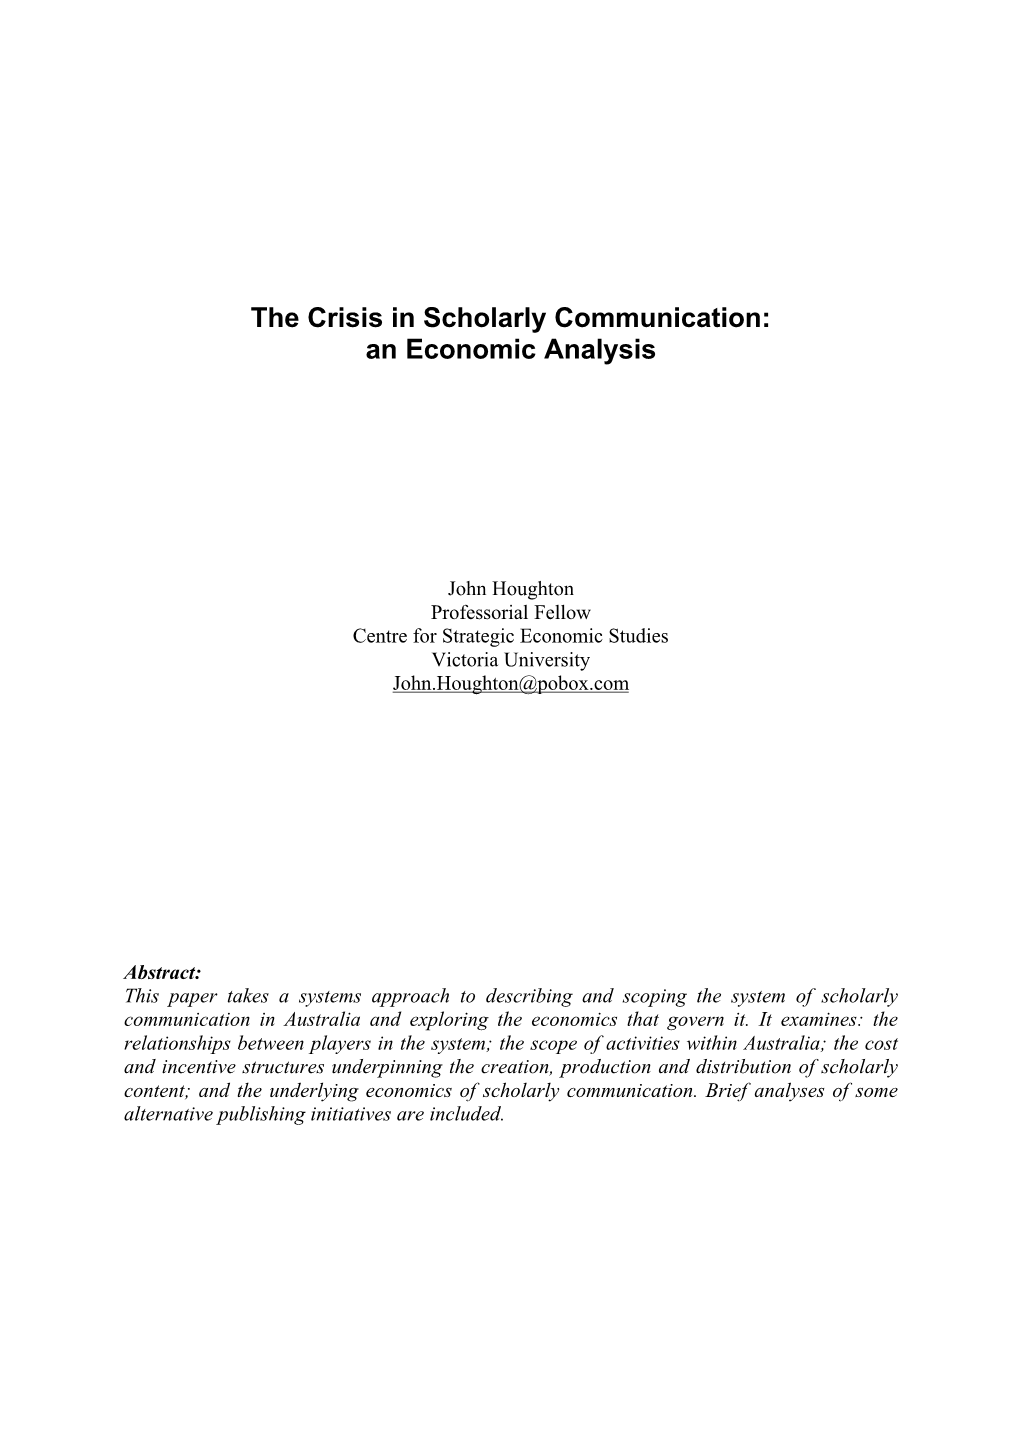 The Crisis in Scholarly Communication: an Economic Analysis